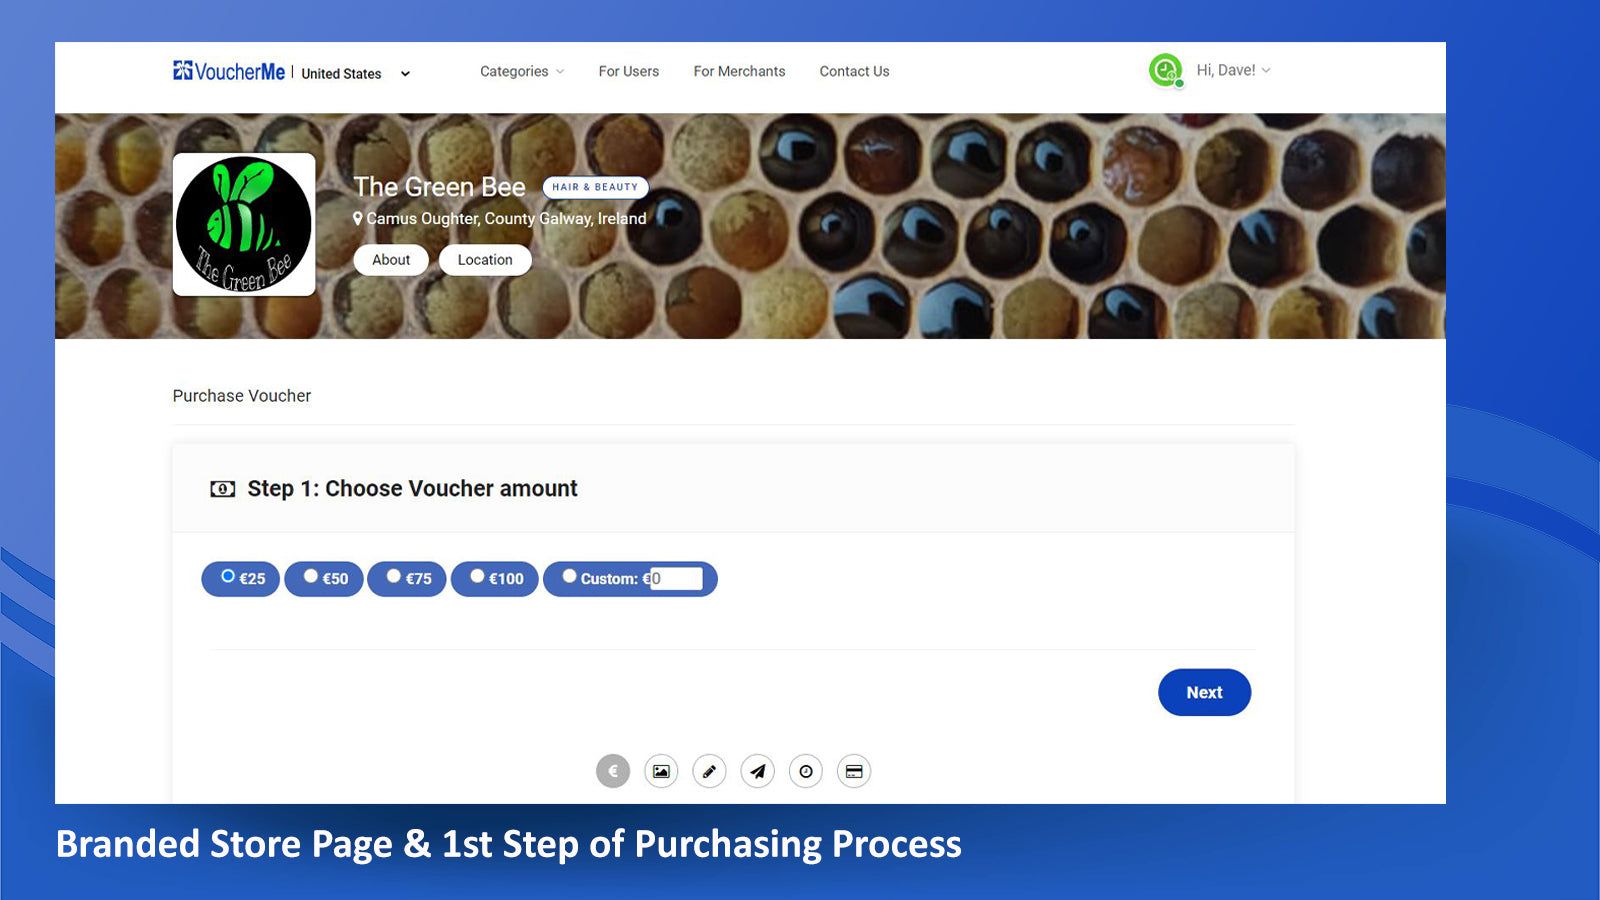 Branded Store Page & 1st Page of Purchasing Process